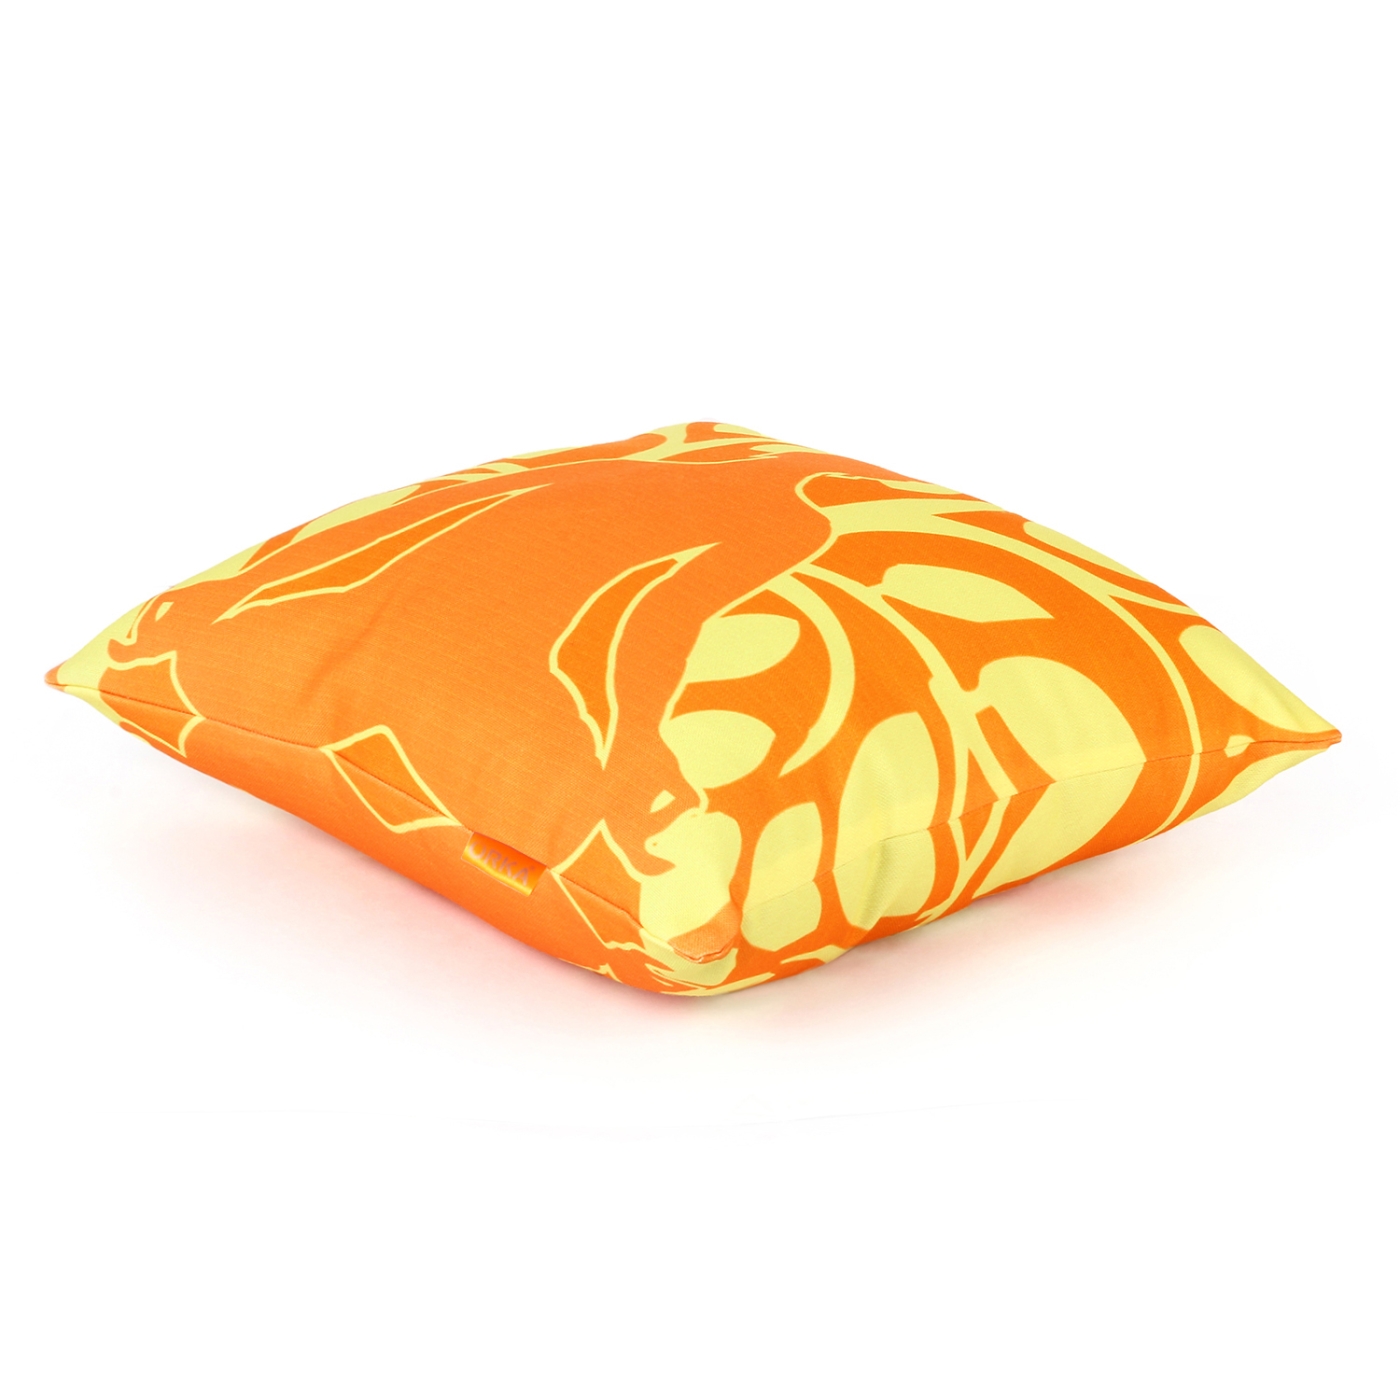 ORKA Digital Printed Canvas Filled With Polyfill Square Cushion 14 X 14 Inch (Orange, Yellow)  